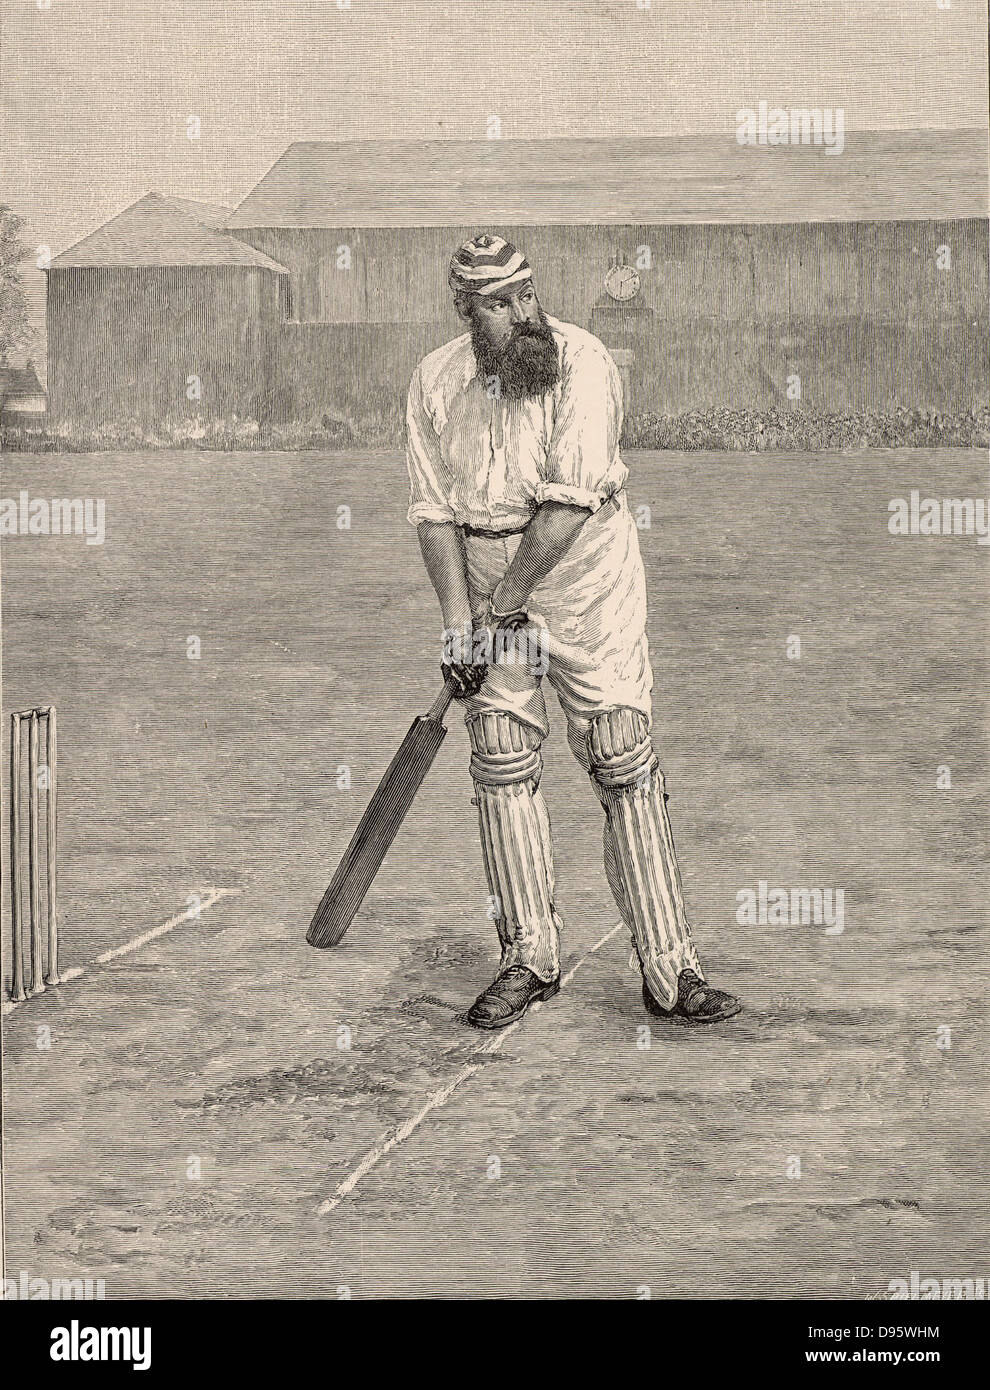 William Gilbert ('W G') Grace (1848-1915) English first-class cricketer and physician, born at Downend near Bristol.  Grace at the crease ready to receive a ball from the bowler.  His career lasted from 1864-1908.  Engraving from 'The English Illustrated Magazine' (London, 1890). Stock Photo